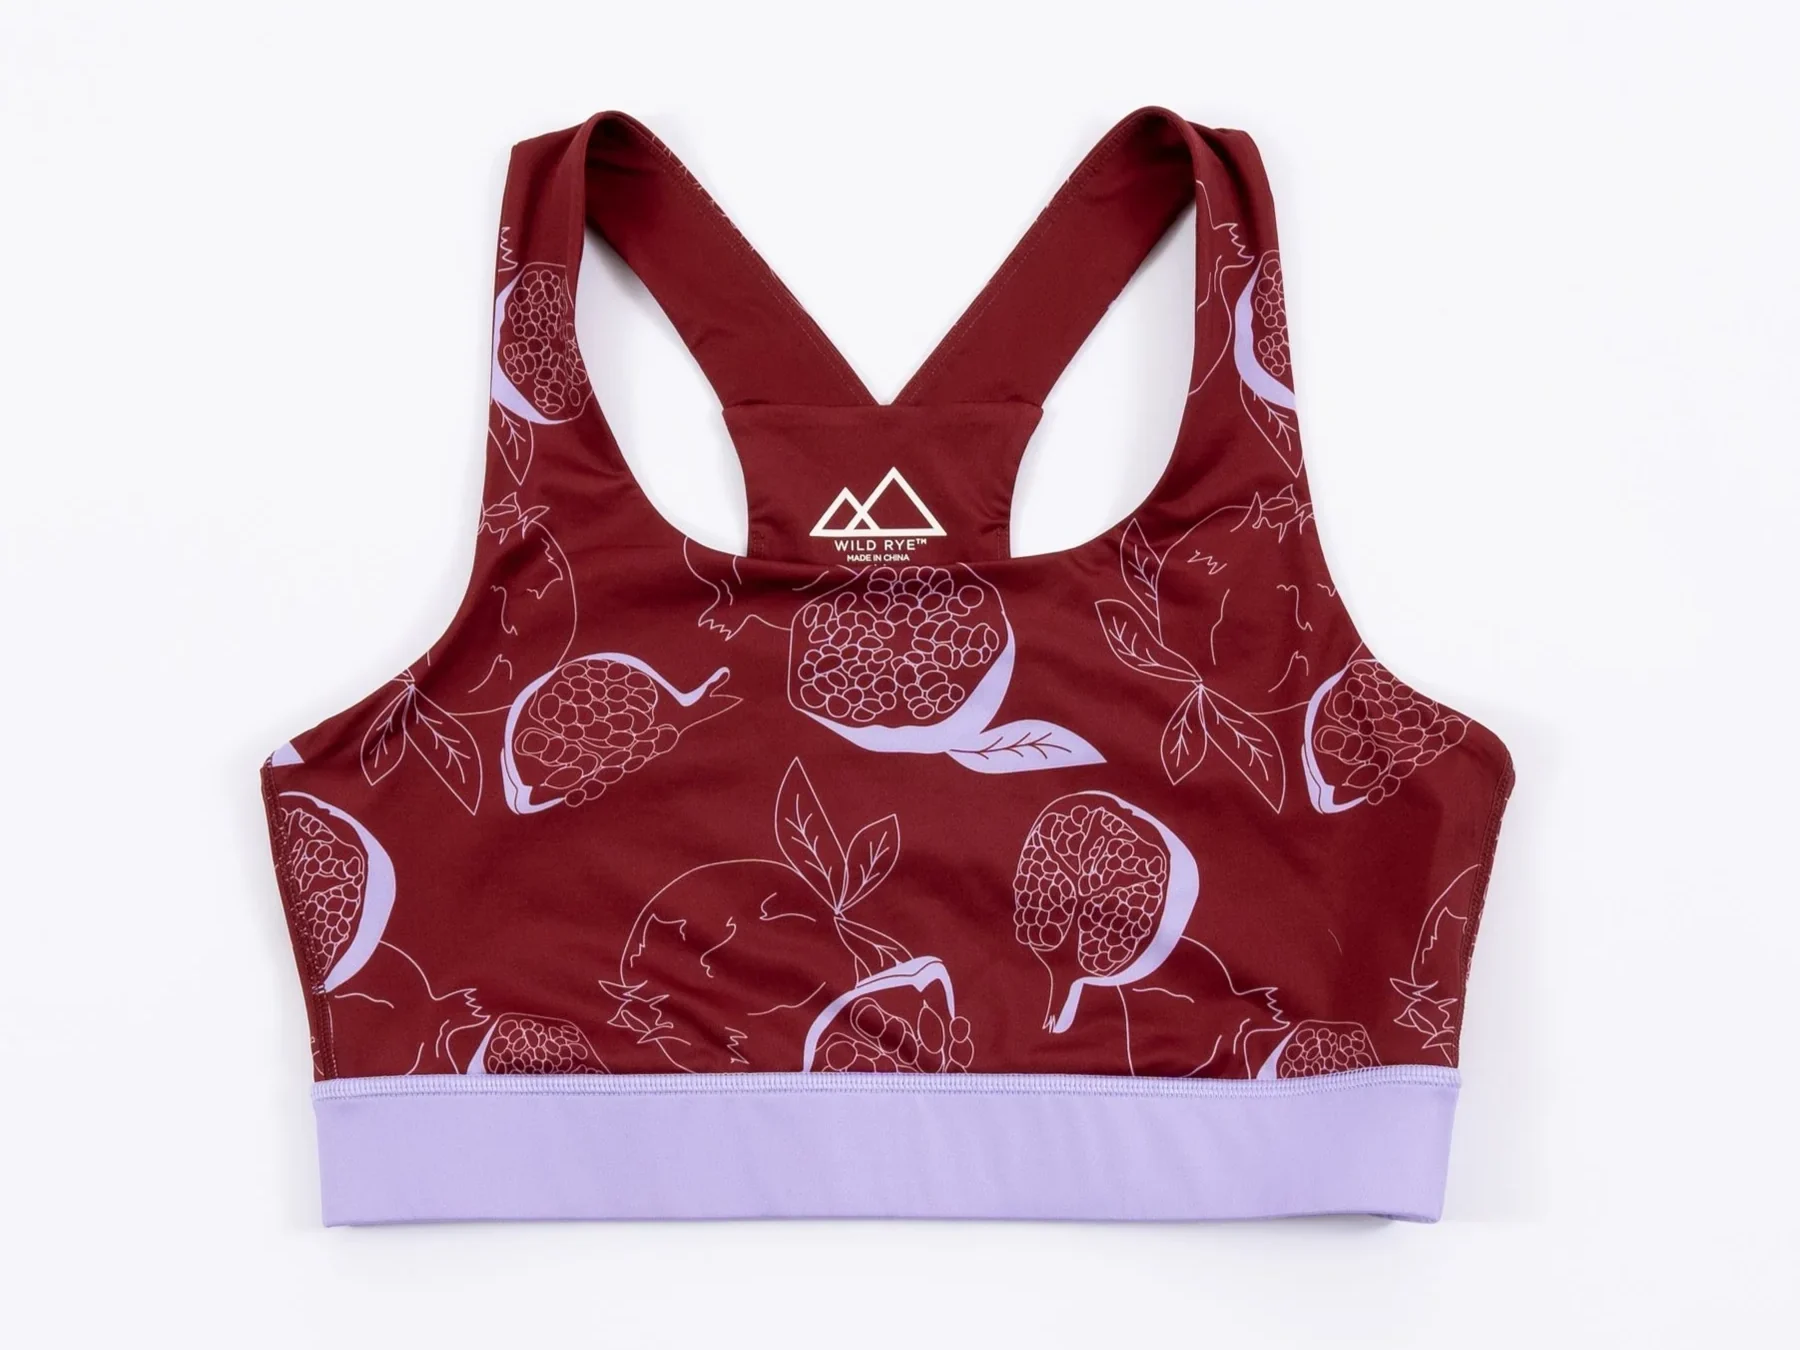 How To Choose a Sports Bra For Hiking - Andrea Kuuipo Abroad